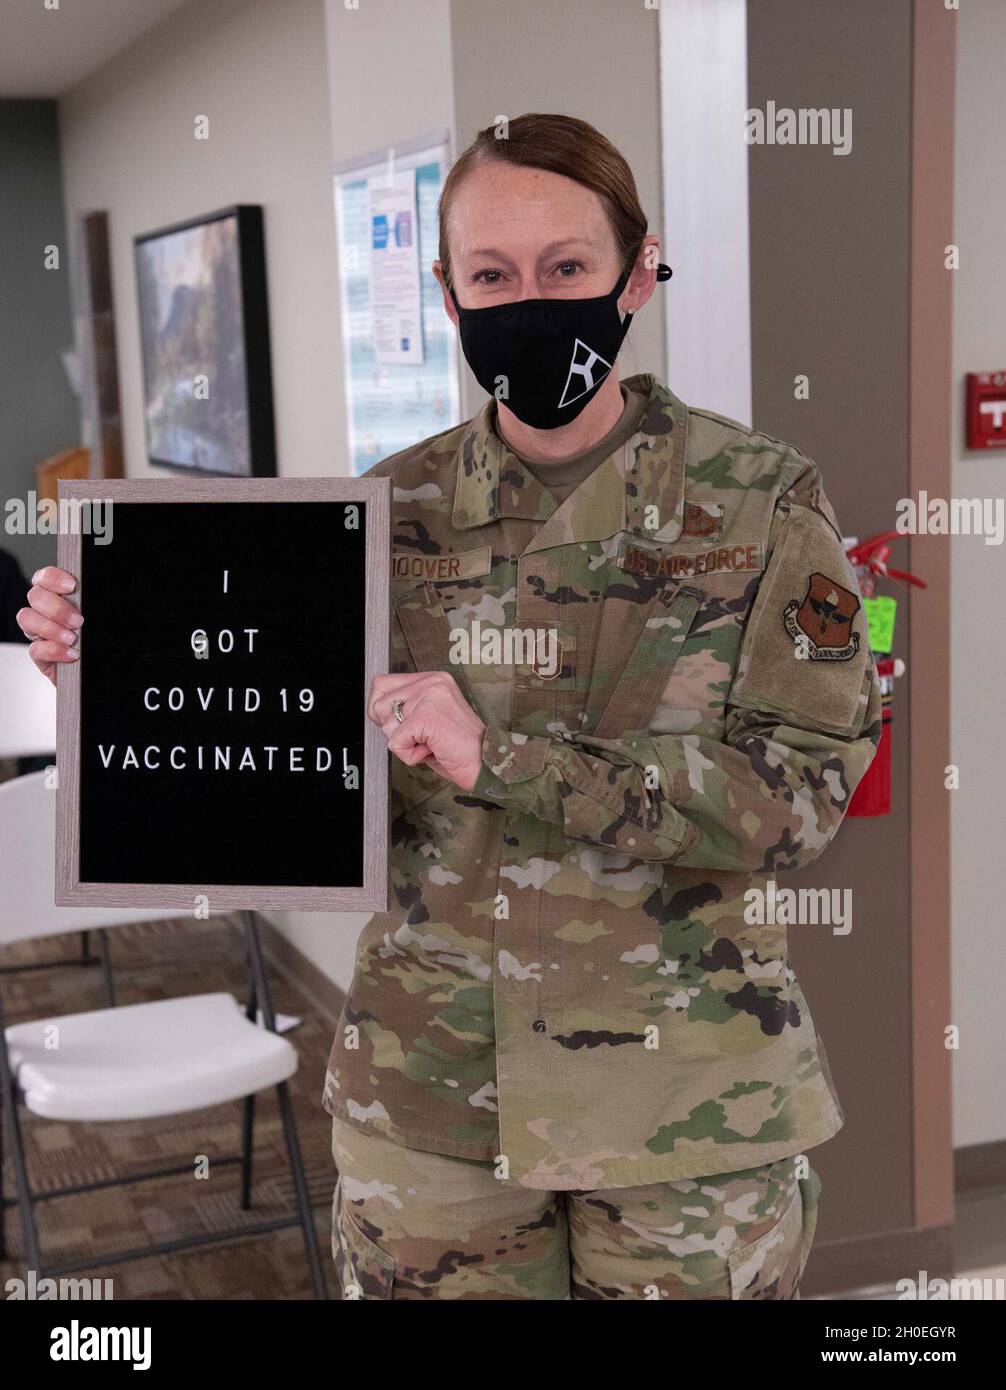 U.S. Air Force Chief Master Sgt. Laura Hoover, the 97th Operations Support Squadron superintendent, poses for a photo after receiving the COVID-19 vaccine February 12, 2021, at Altus Air Force Base, Oklahoma. Hoover explained she volunteered for the COVID-19 vaccine because she wanted to help protect herself and others from the spread of COVID-19. Stock Photo